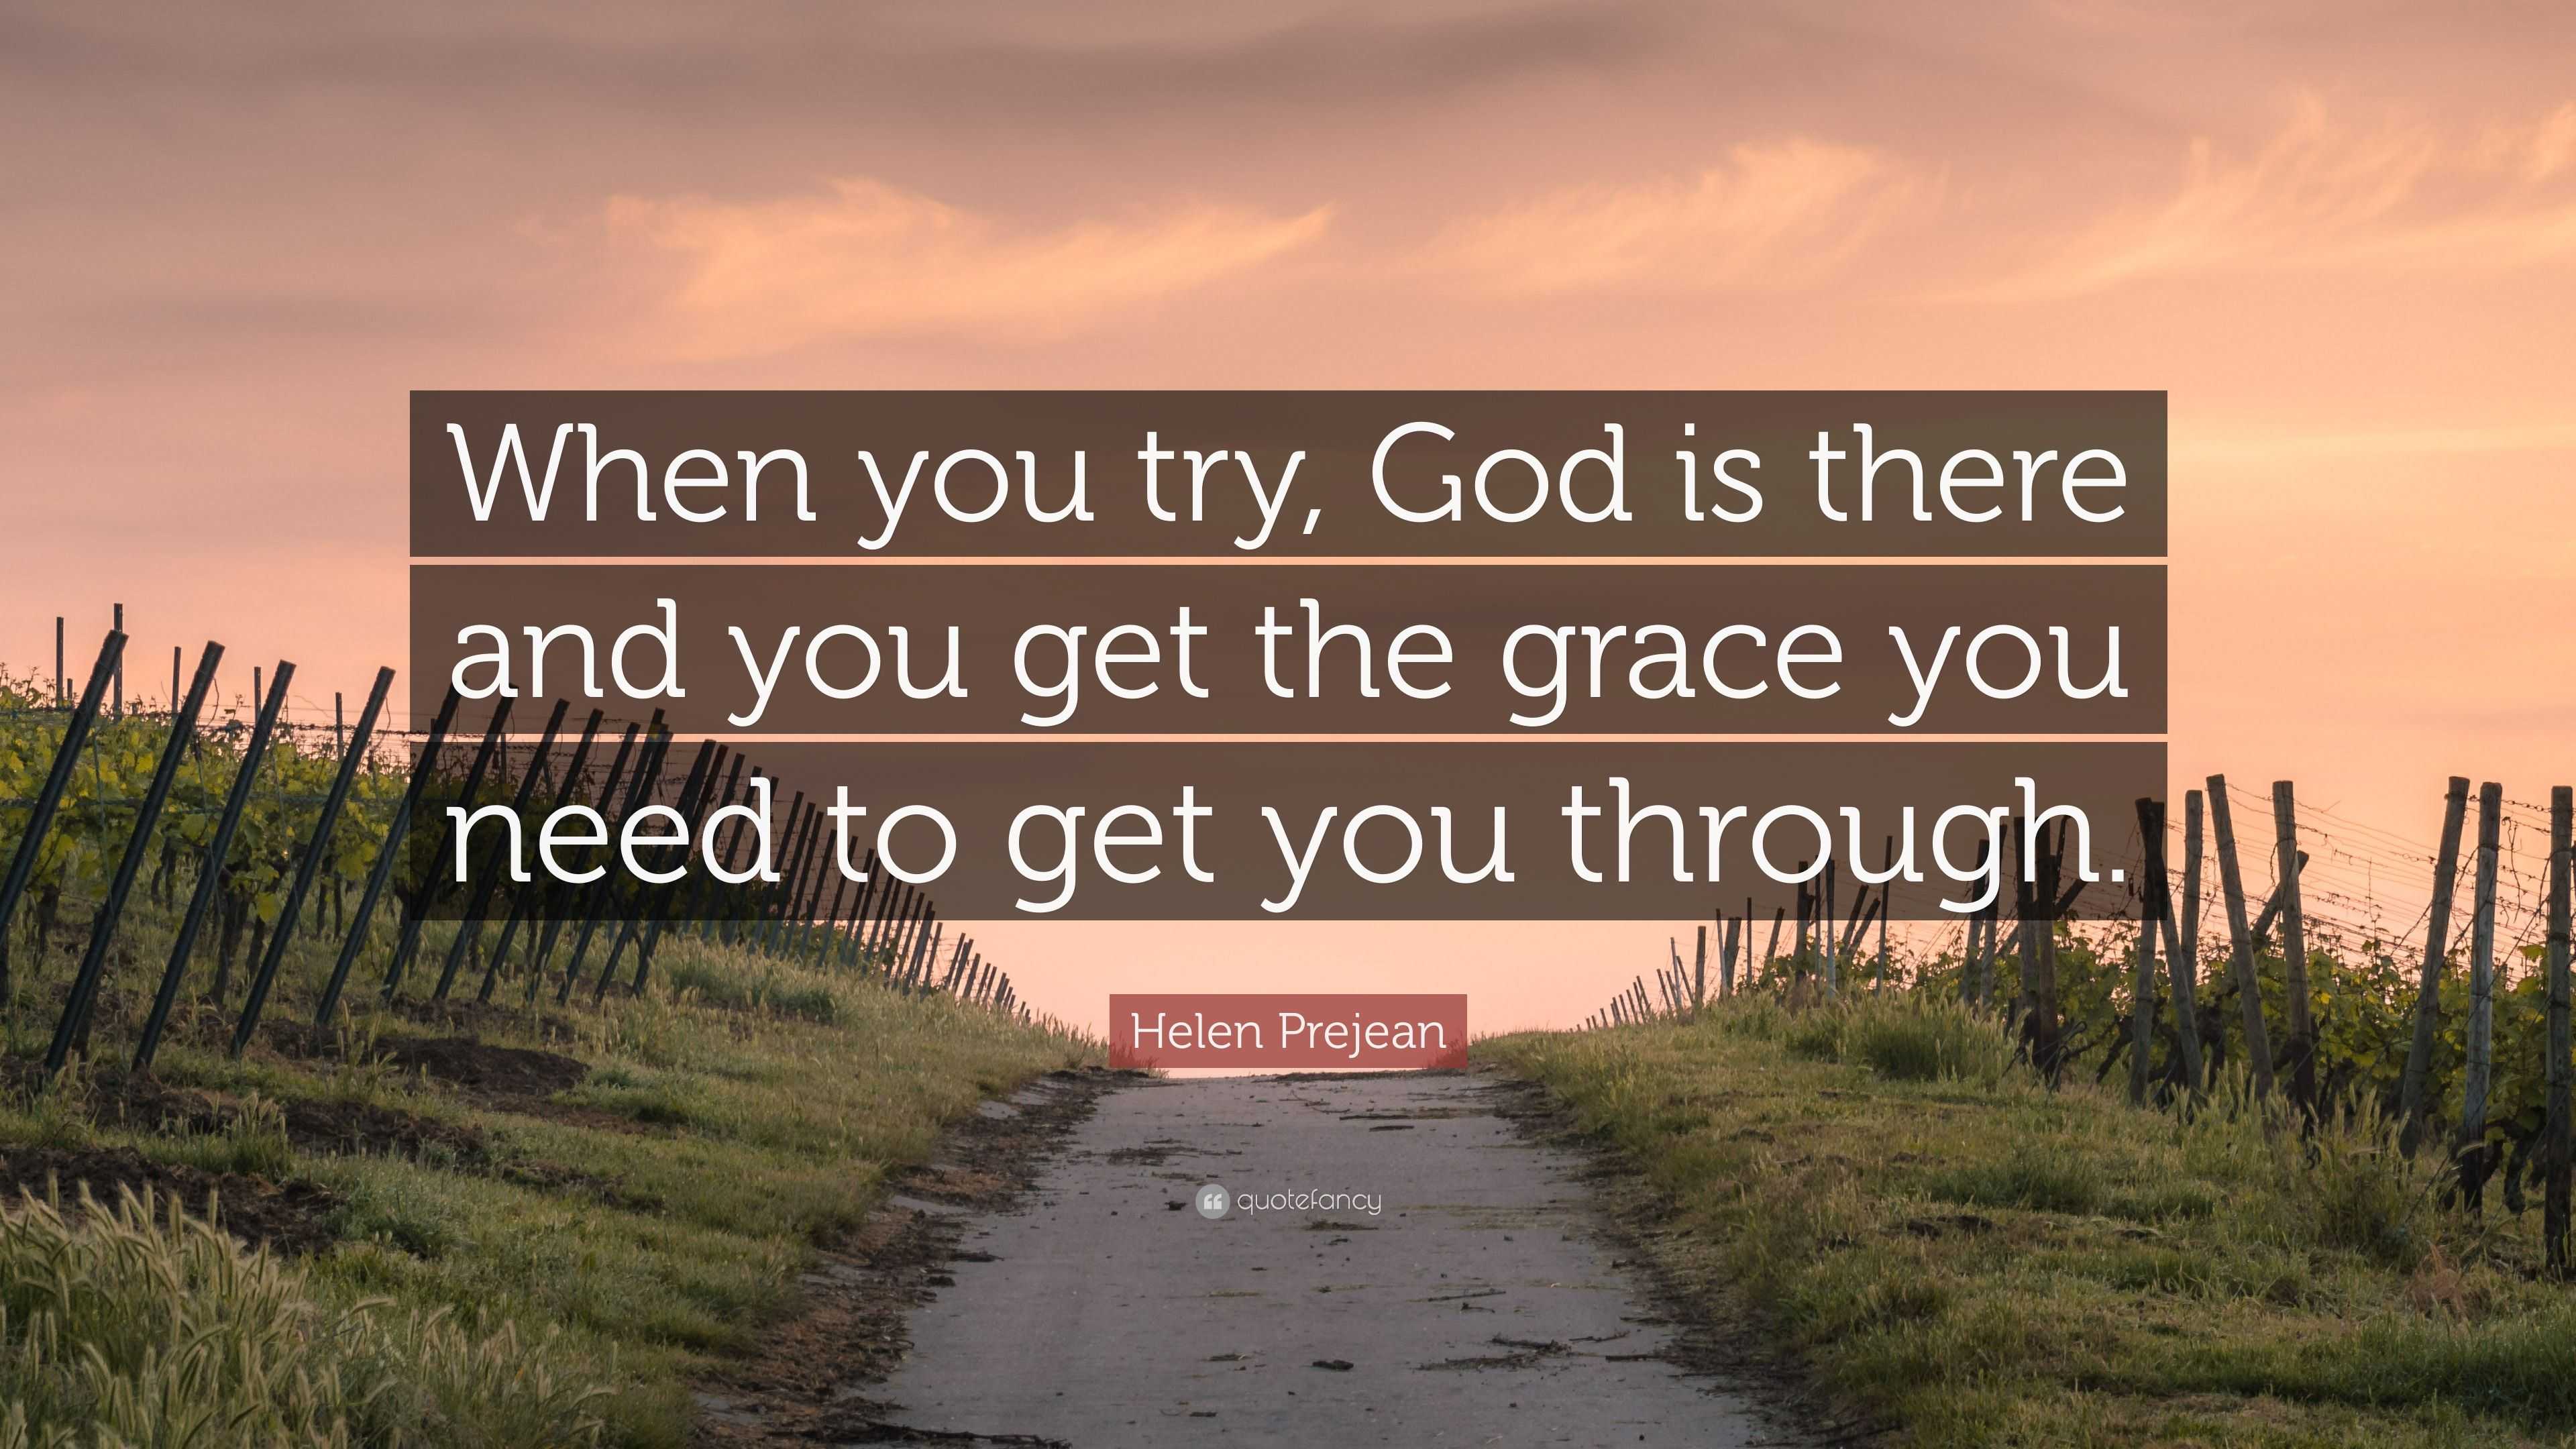 Helen Prejean Quote: “When you try, God is there and you get the grace ...